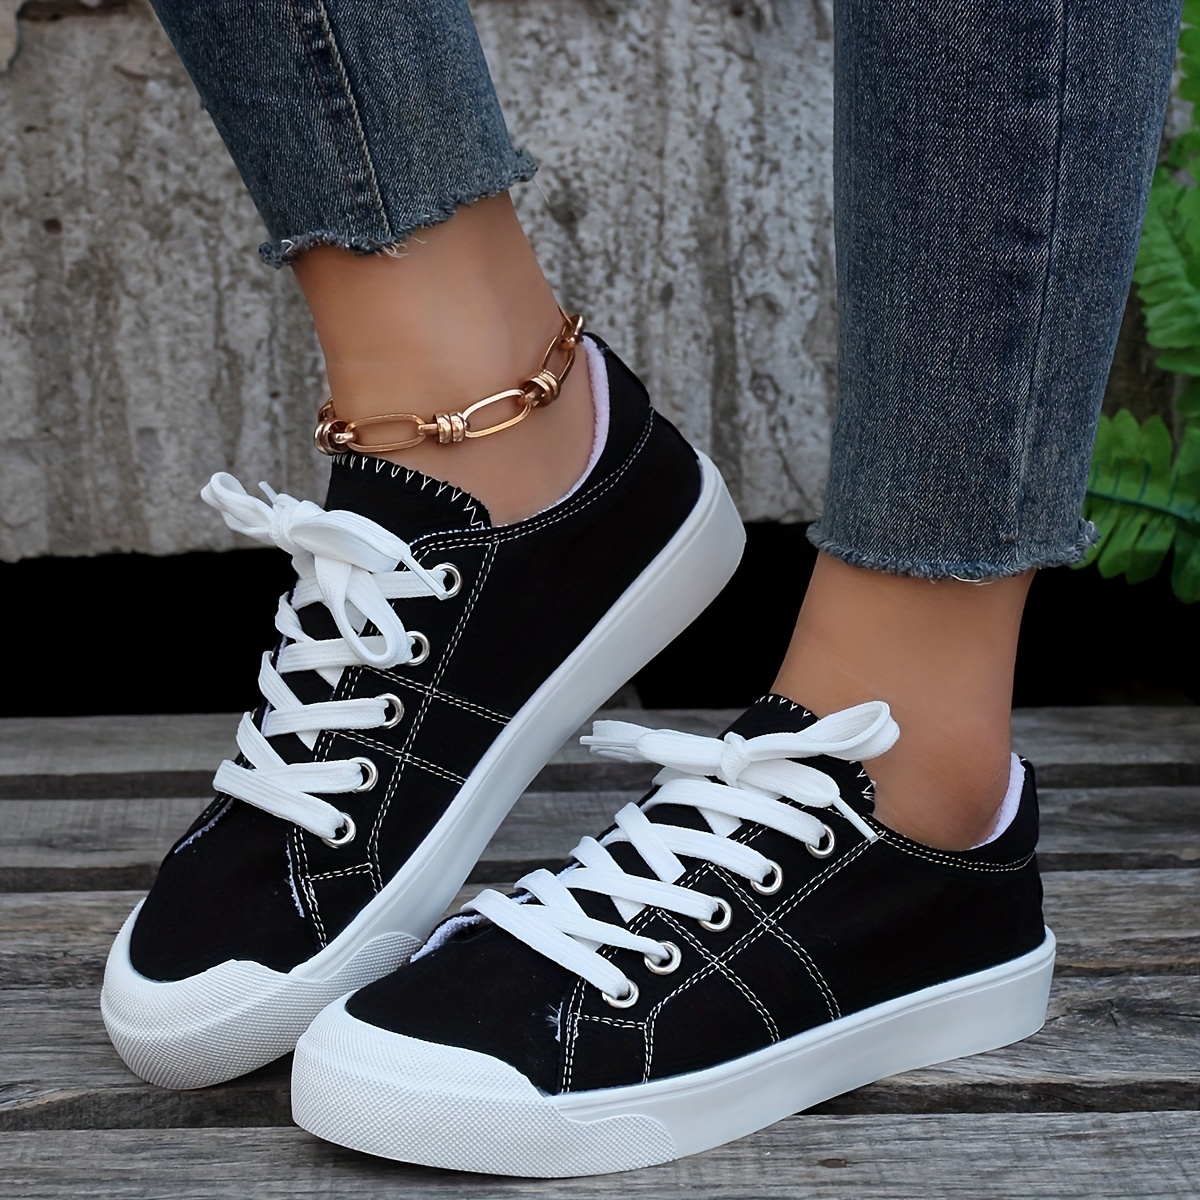 Women's White Canvas Sneakers, Comfy & Stylish